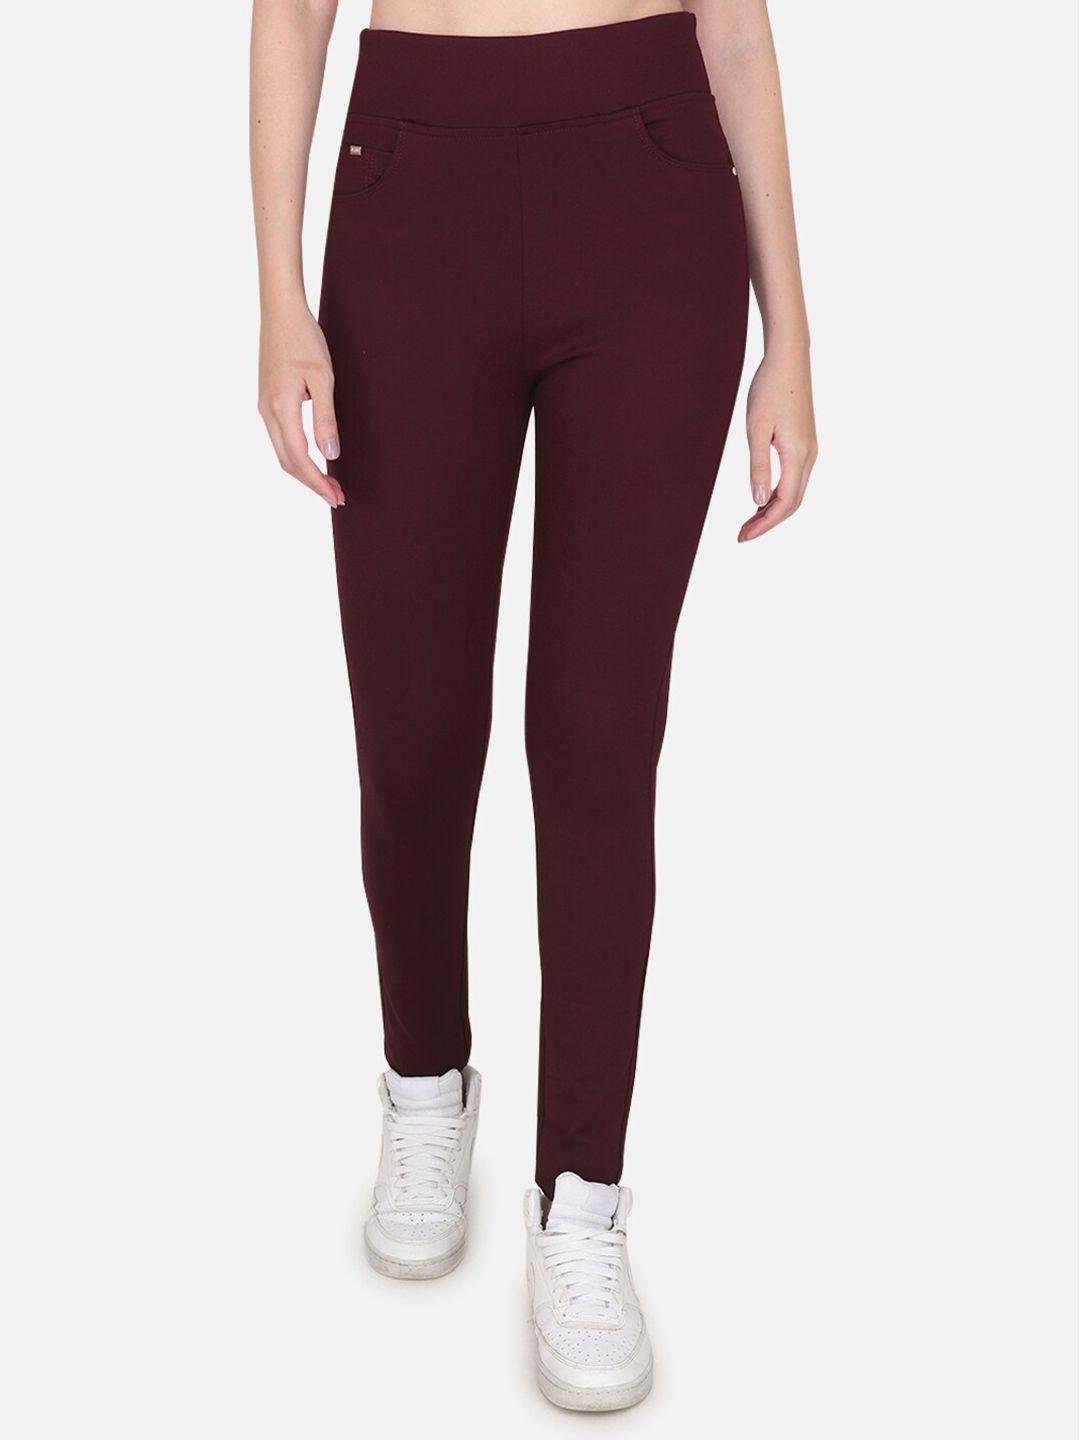 albion-women-relaxed-fit-stretchble-cotton-jeggings